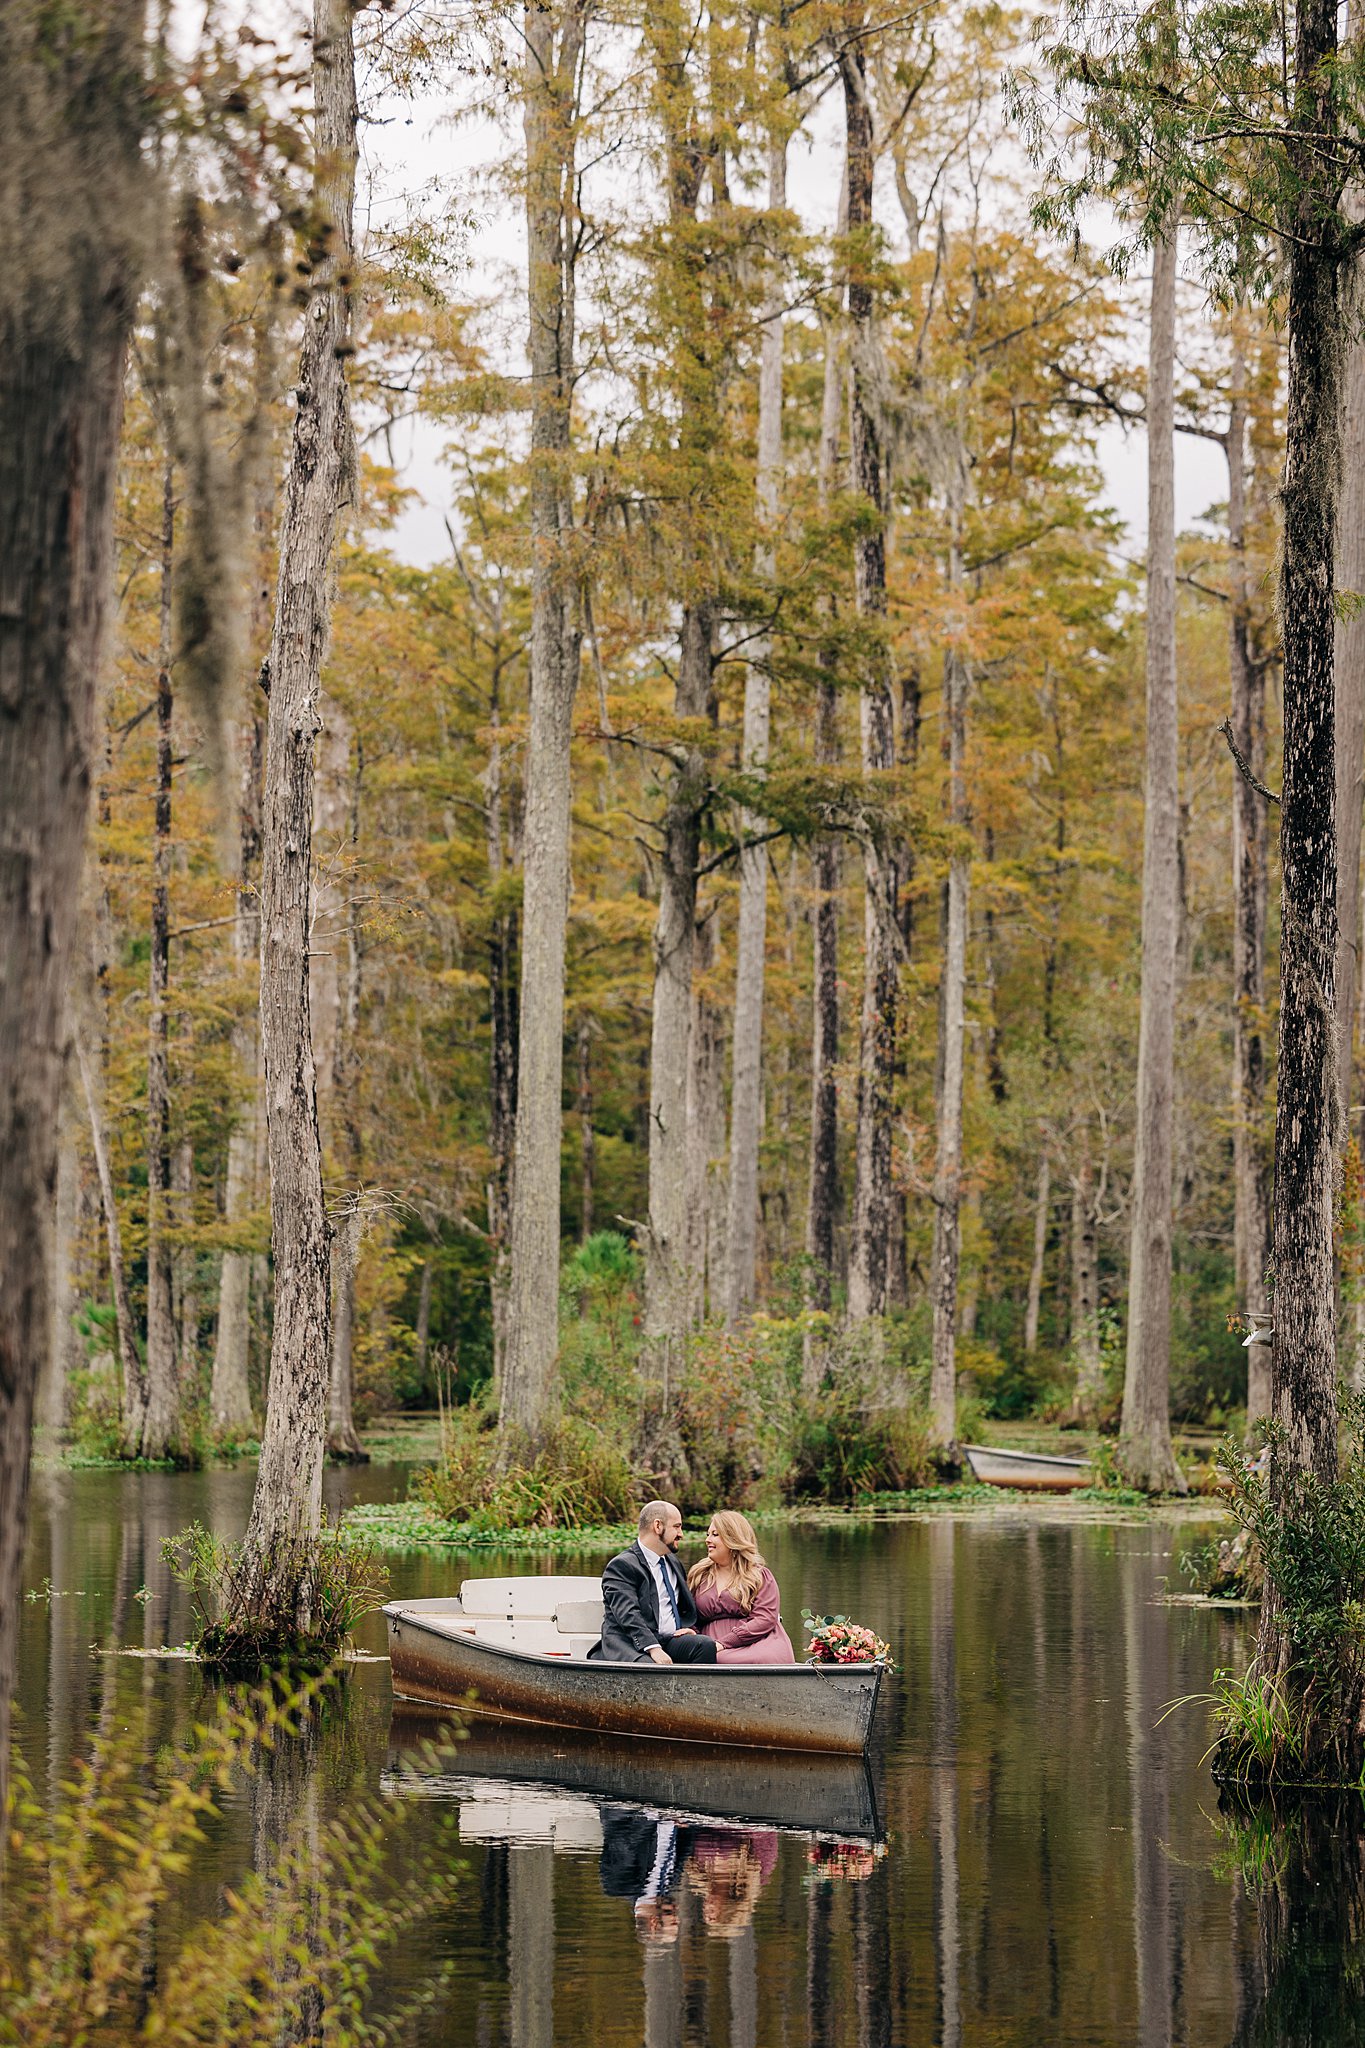 A couple in a small boat float through a swamp in a blue suit and pink dress